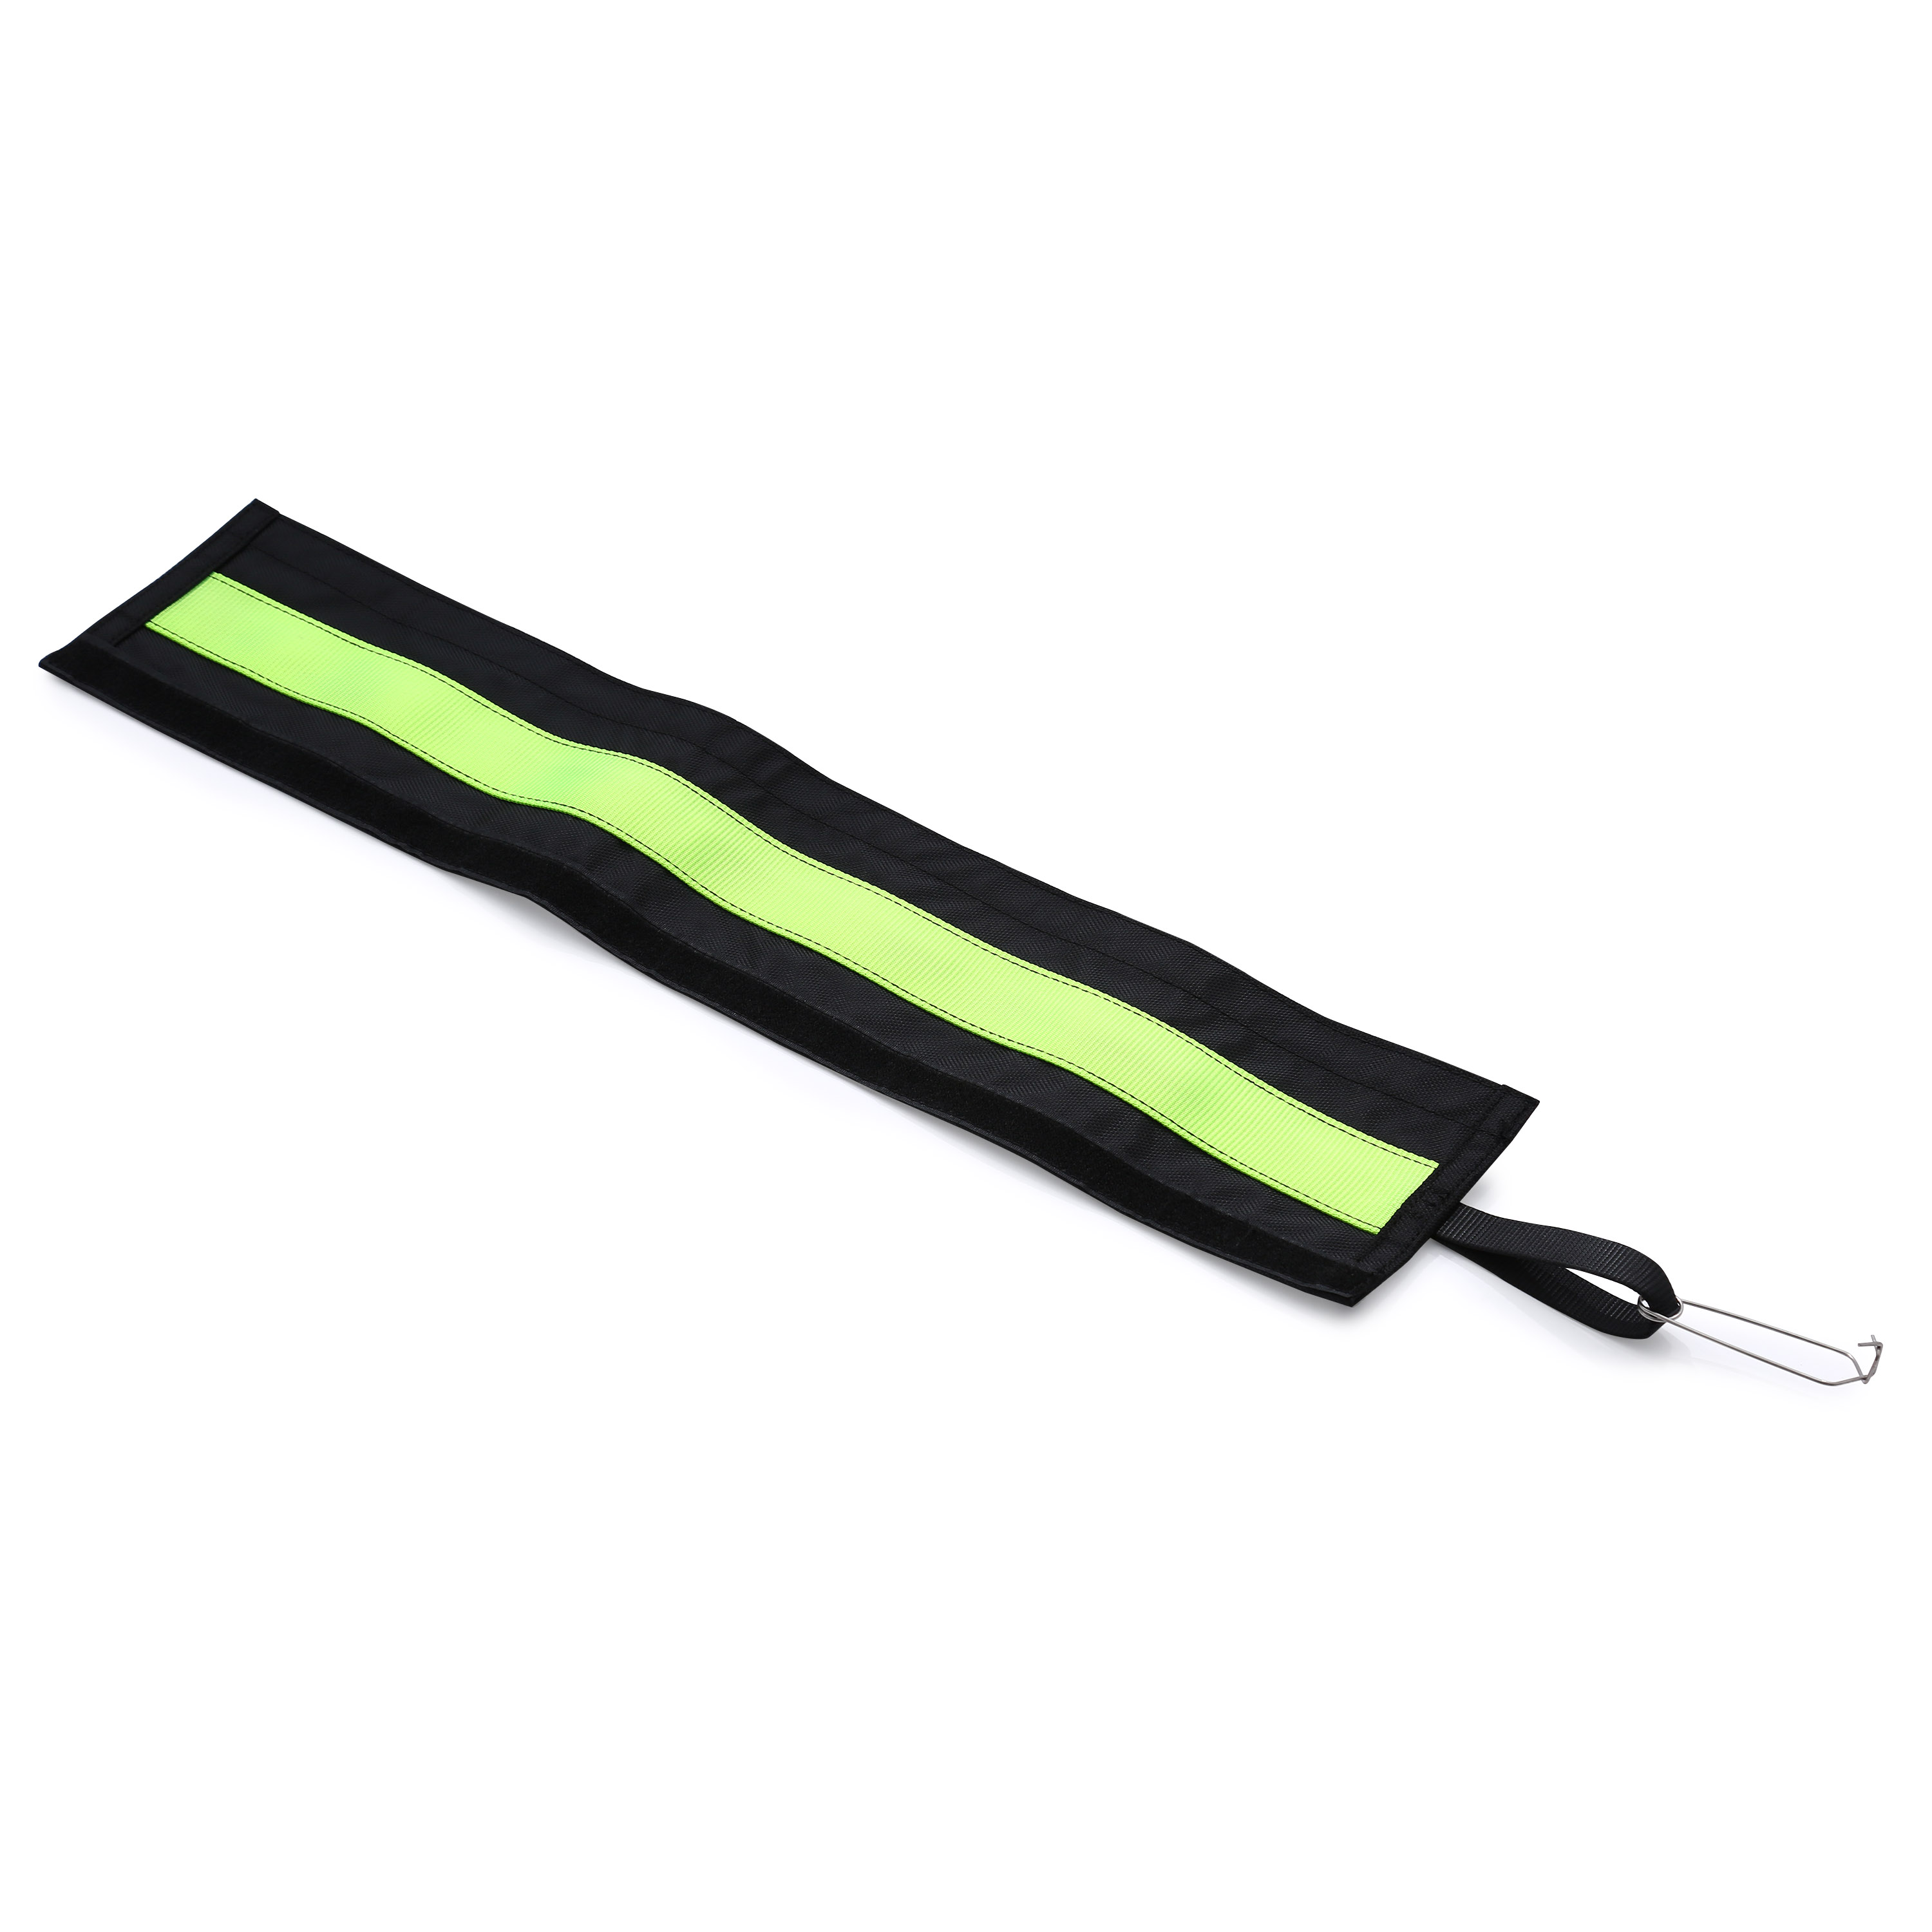 Details about   Black PVC Rock Climbing Mountaineering Exploring Rope Protector Sleeve Cover 